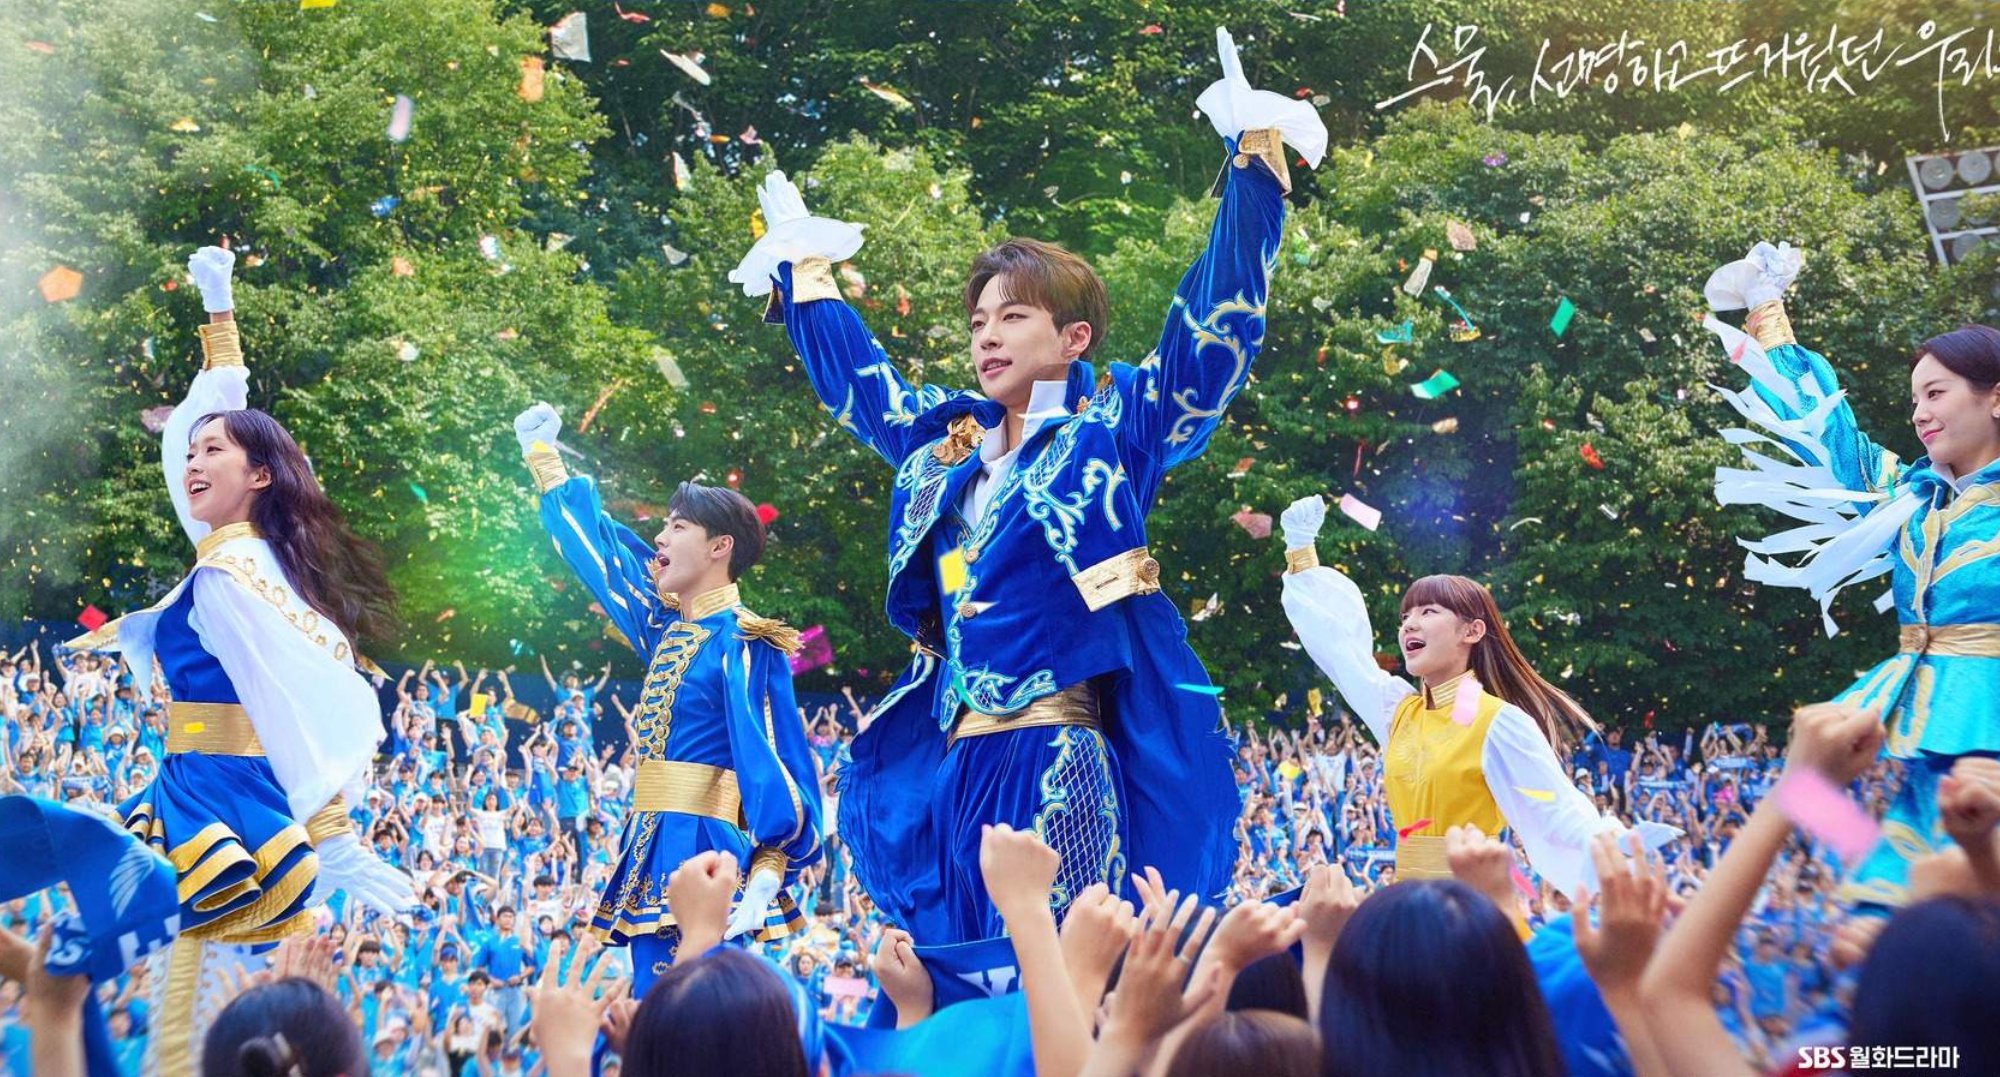 'Cheer Up' Is the 2022 KDrama Based on Yonsei University's Cheer Team?